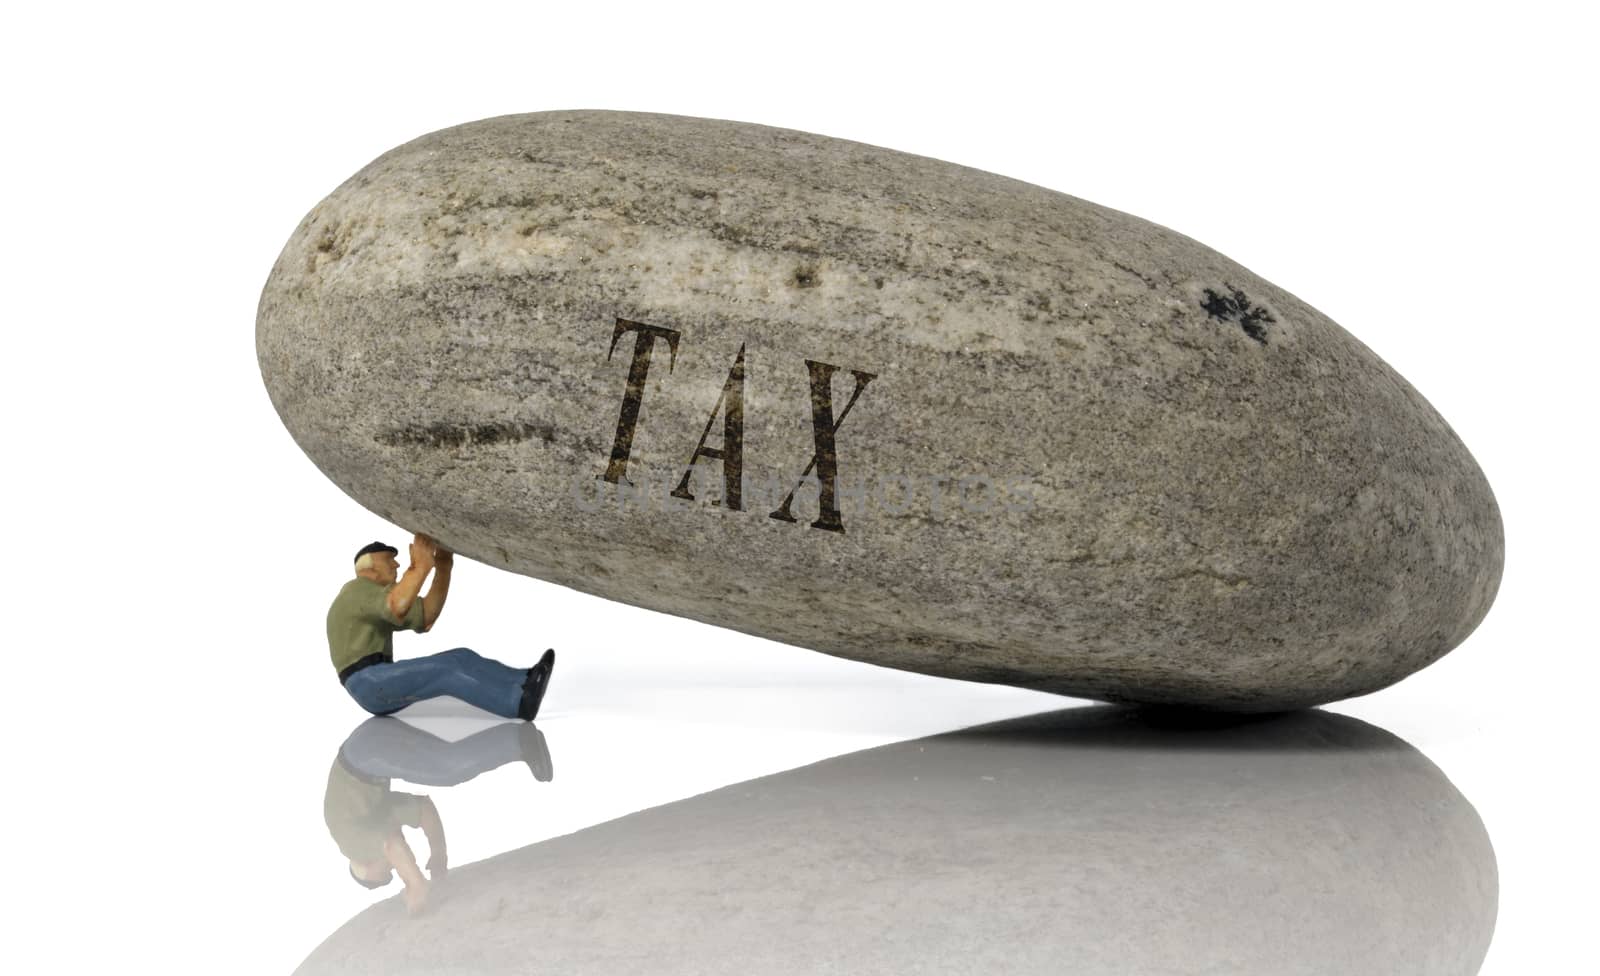 Tax concept, man collapses under the tax burden